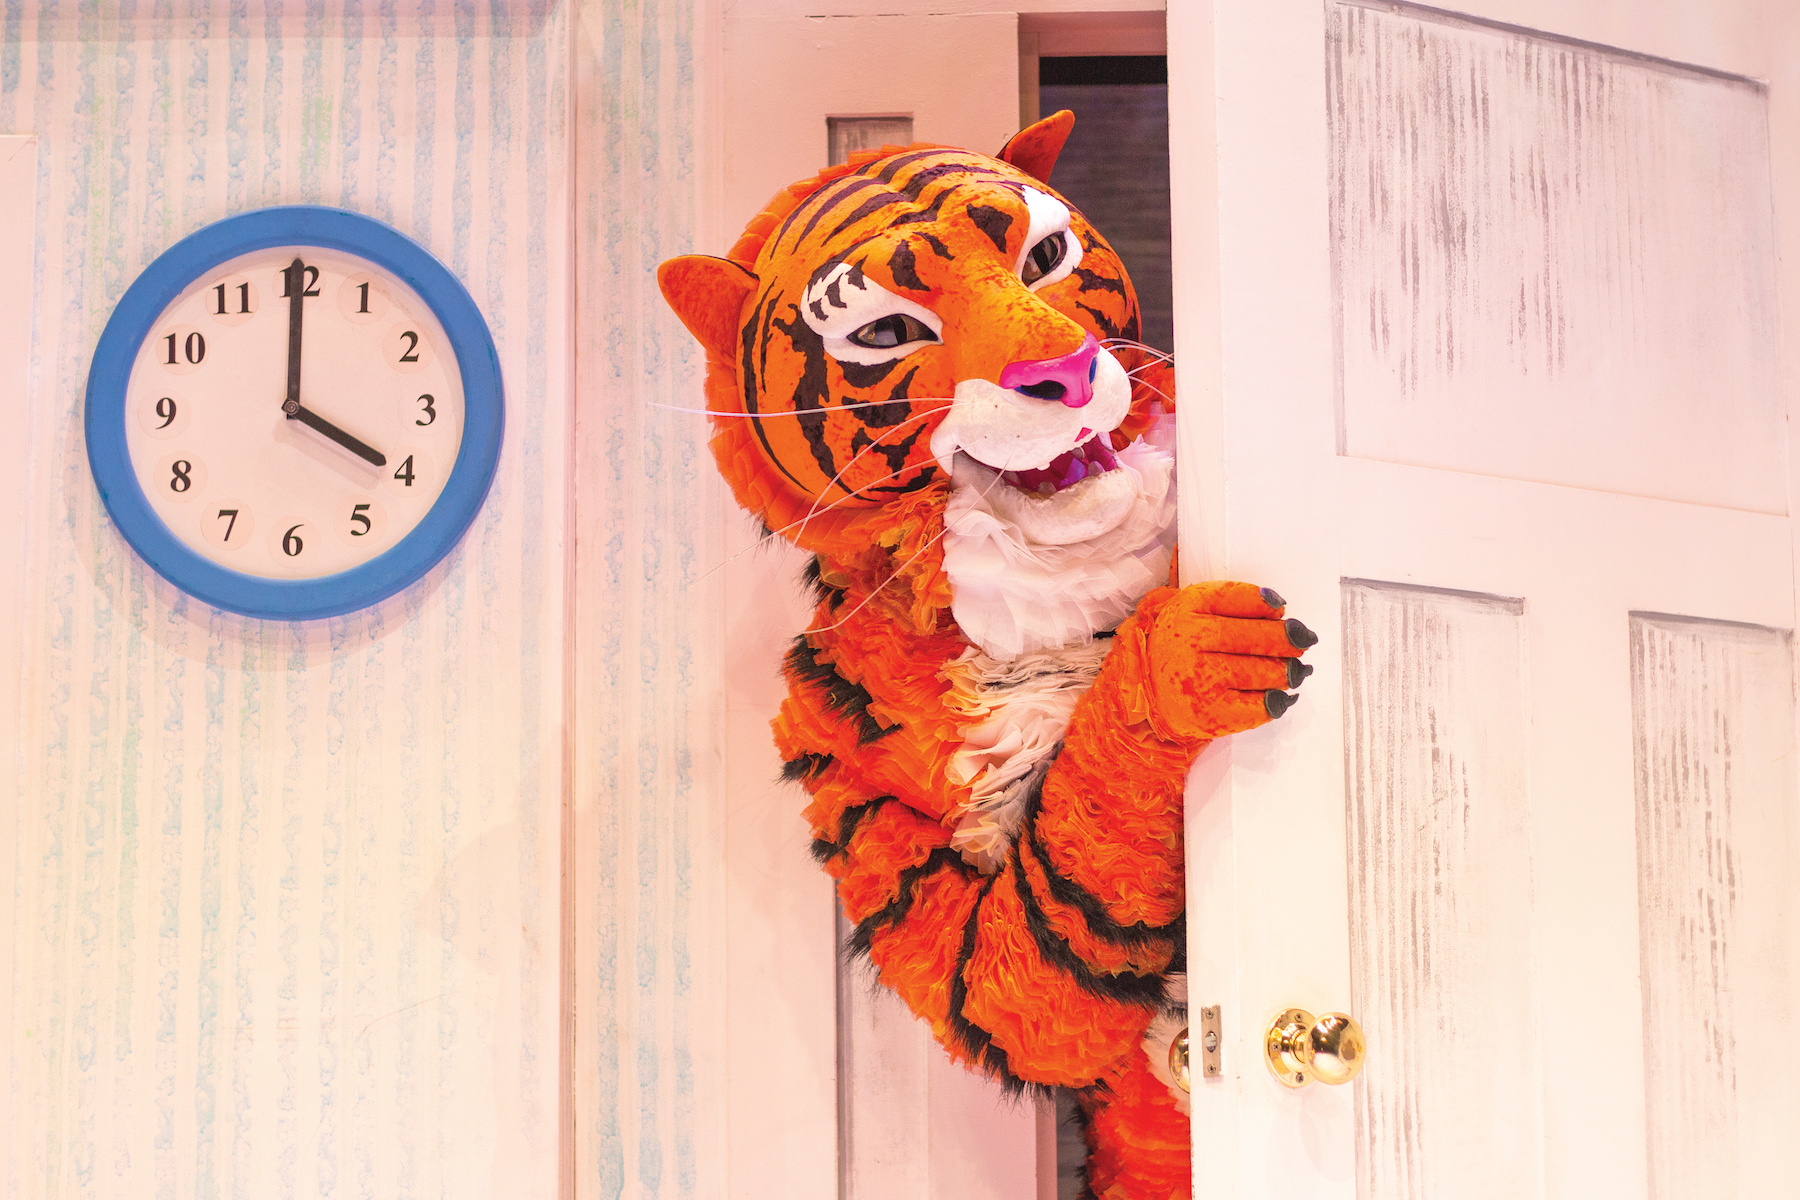 The Tiger Who Came to Tea theatre production